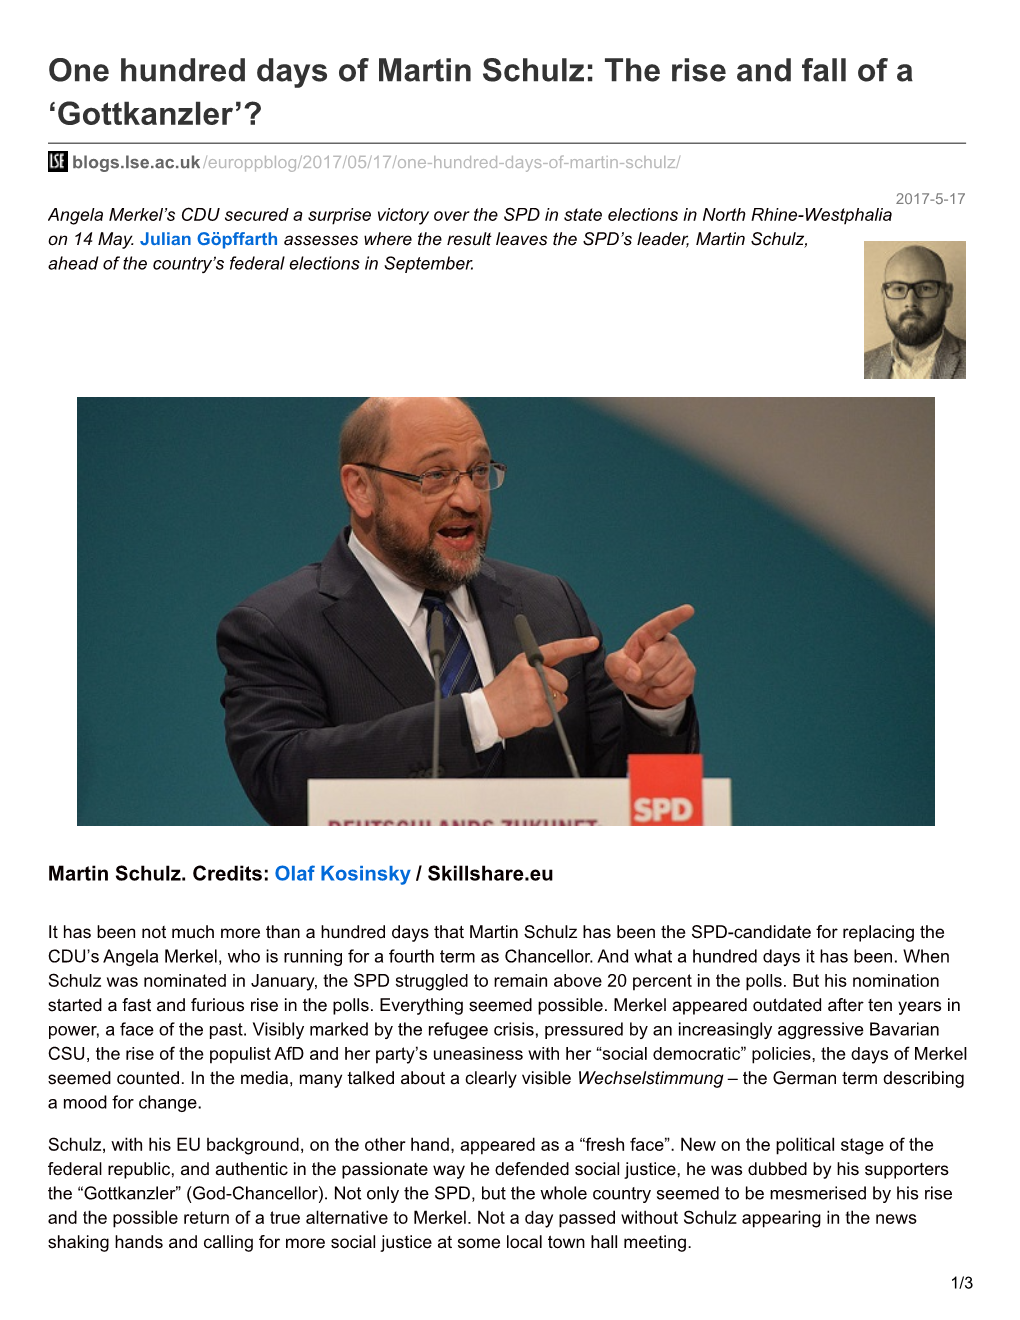 One Hundred Days of Martin Schulz: the Rise and Fall of a ‘Gottkanzler’?